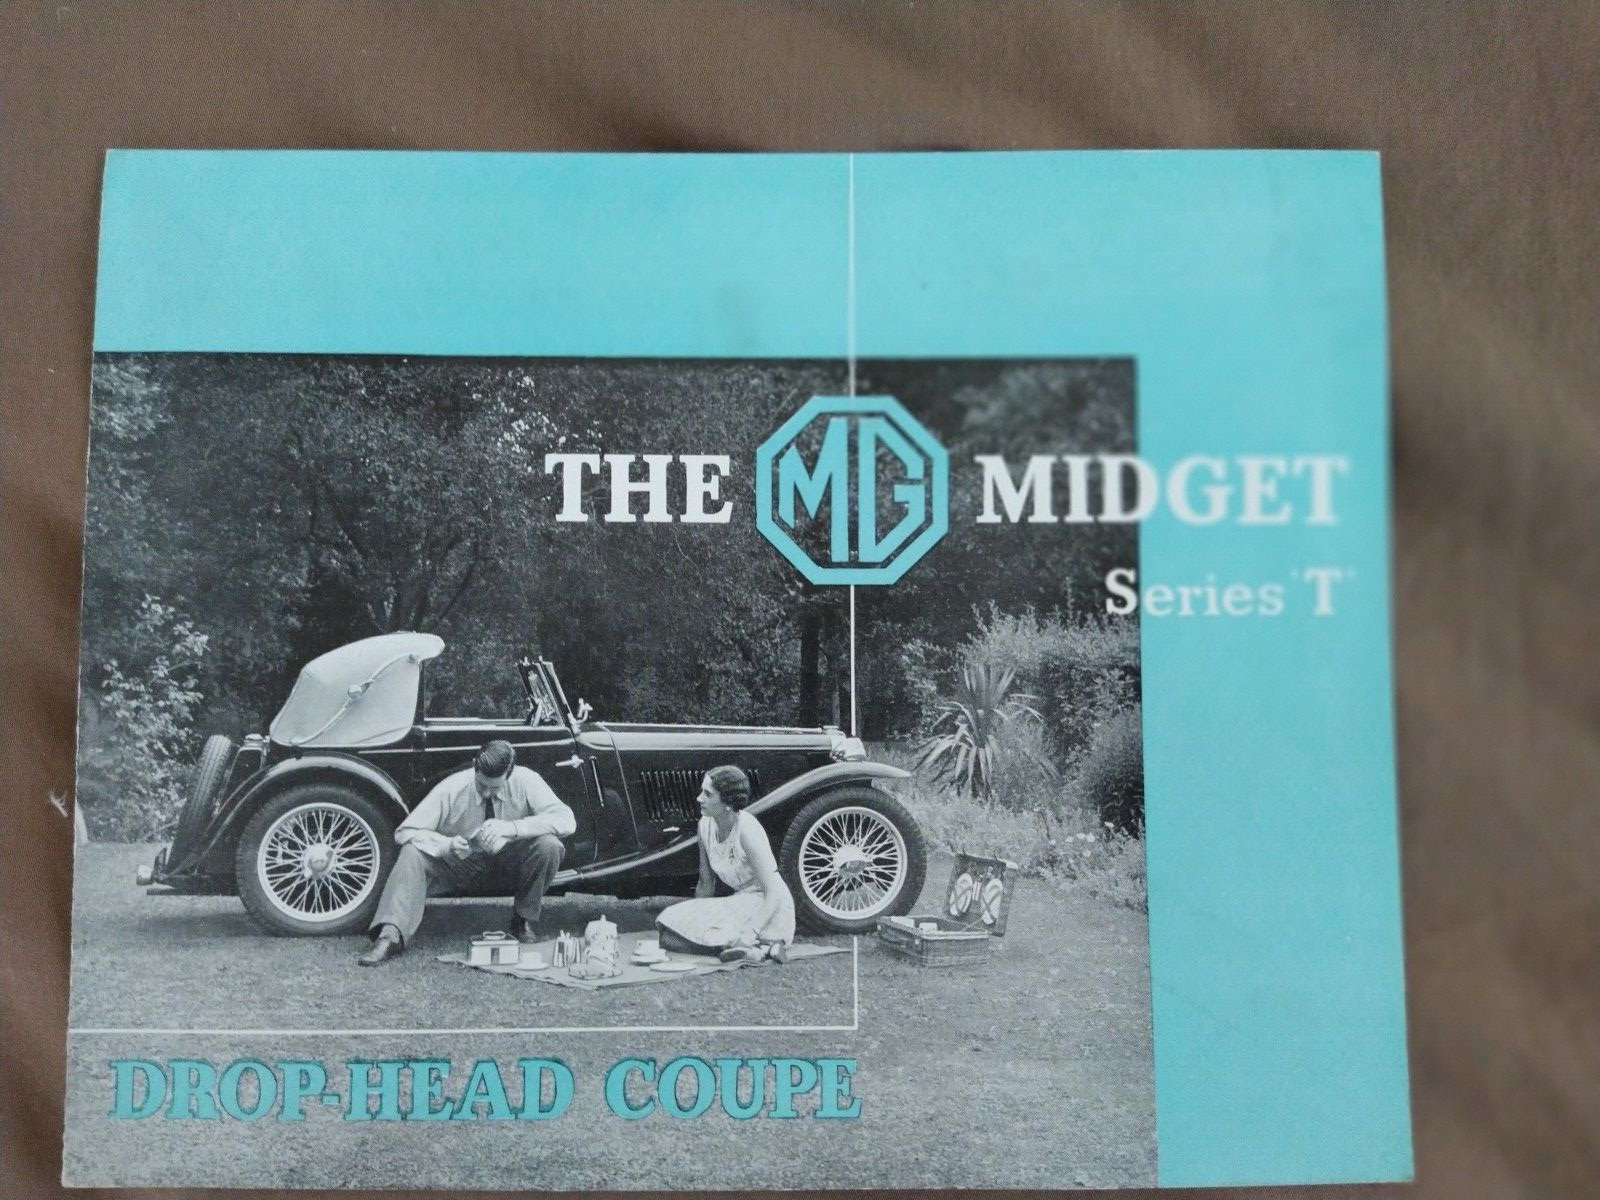 THE MG MIDGET SERIES T  DROPHEAD COUPE  BROCHURE 1938 - 4  PAGES